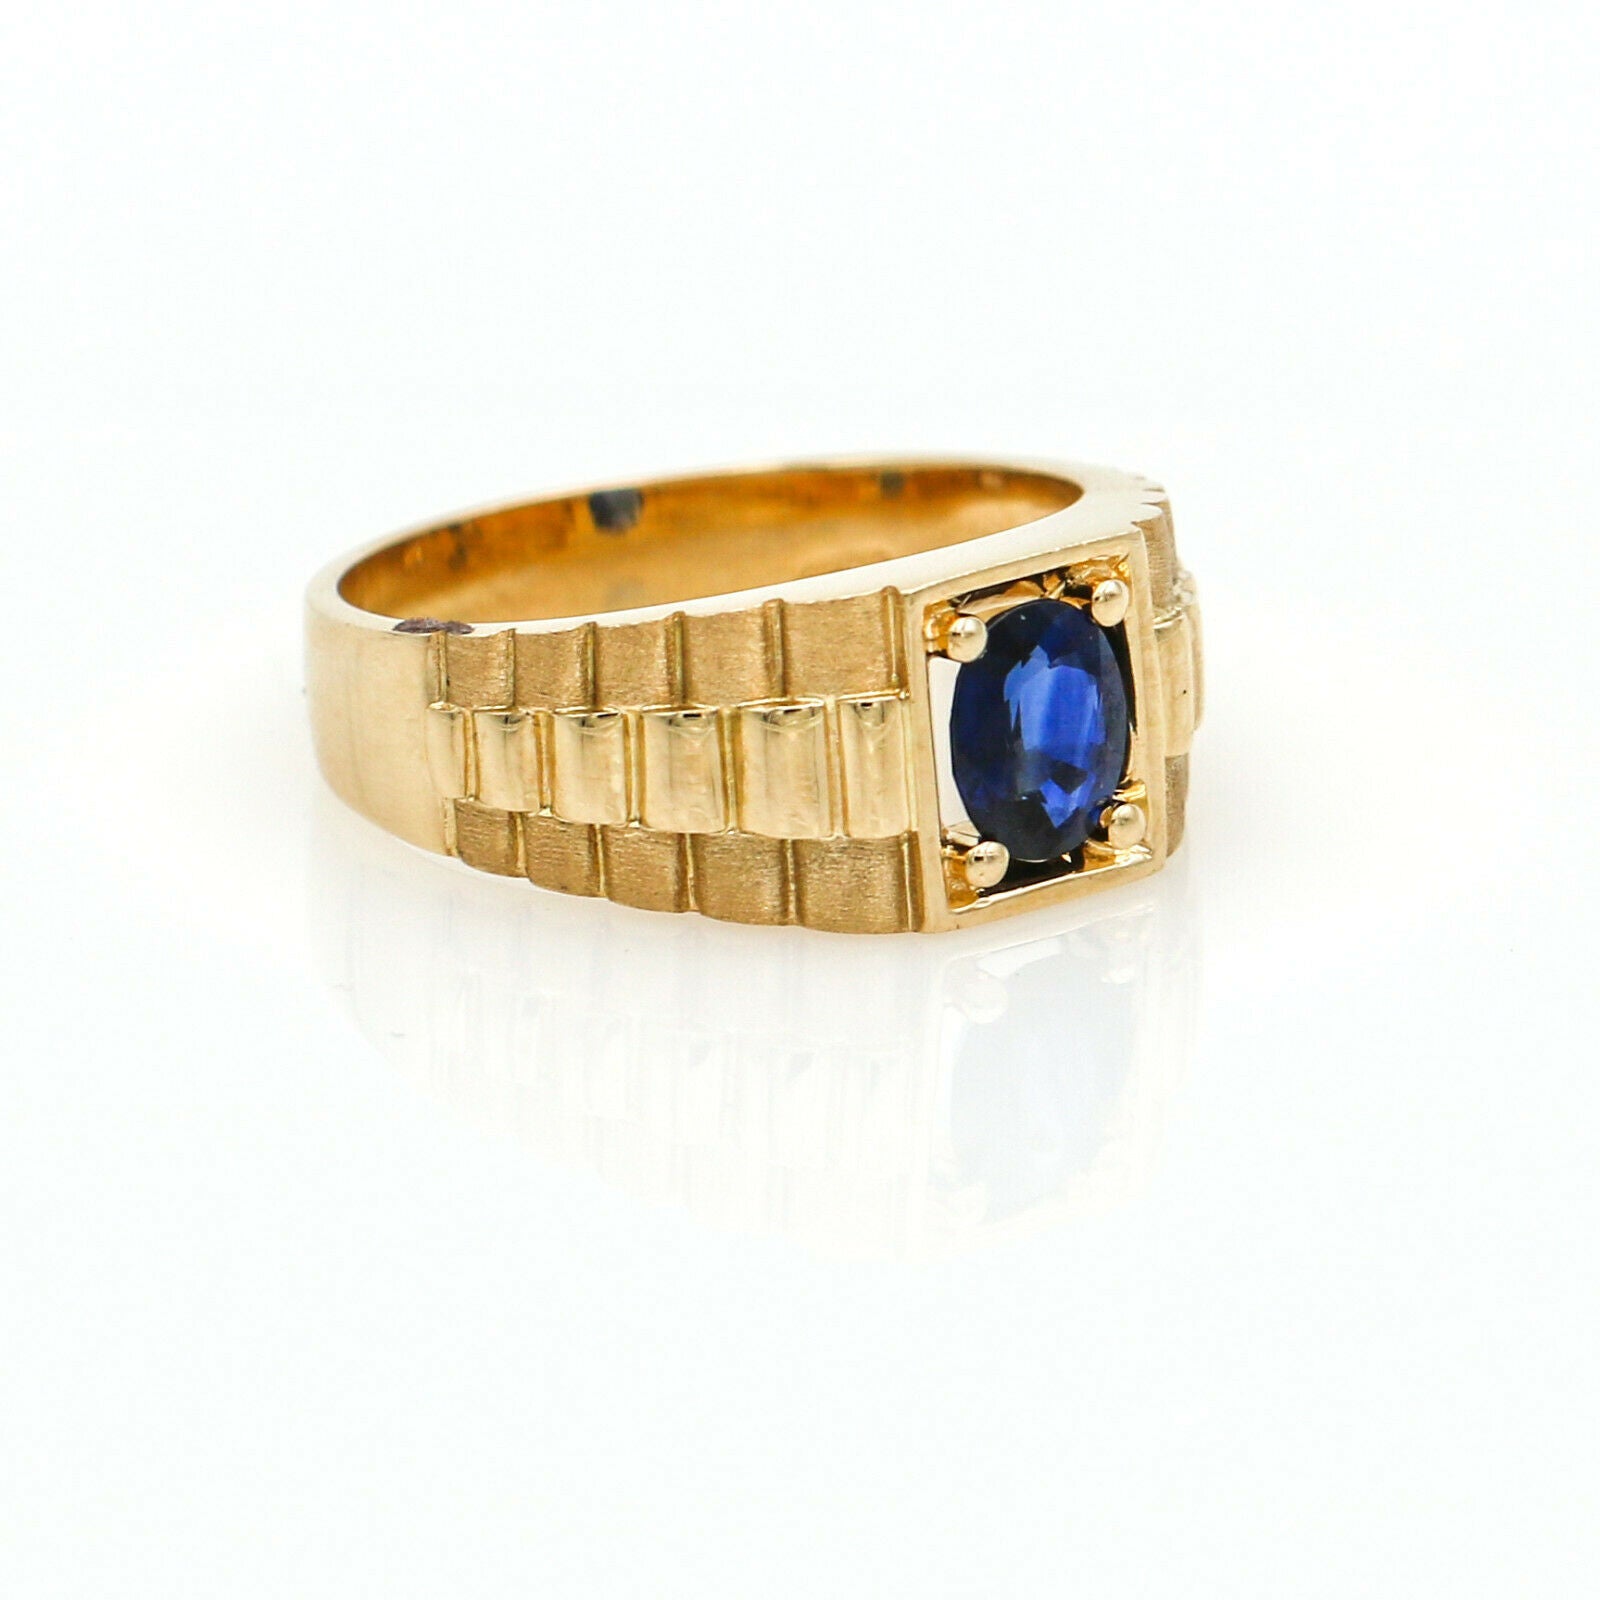 Men's Blue Sapphire Statement Ring in 14k Yellow Gold